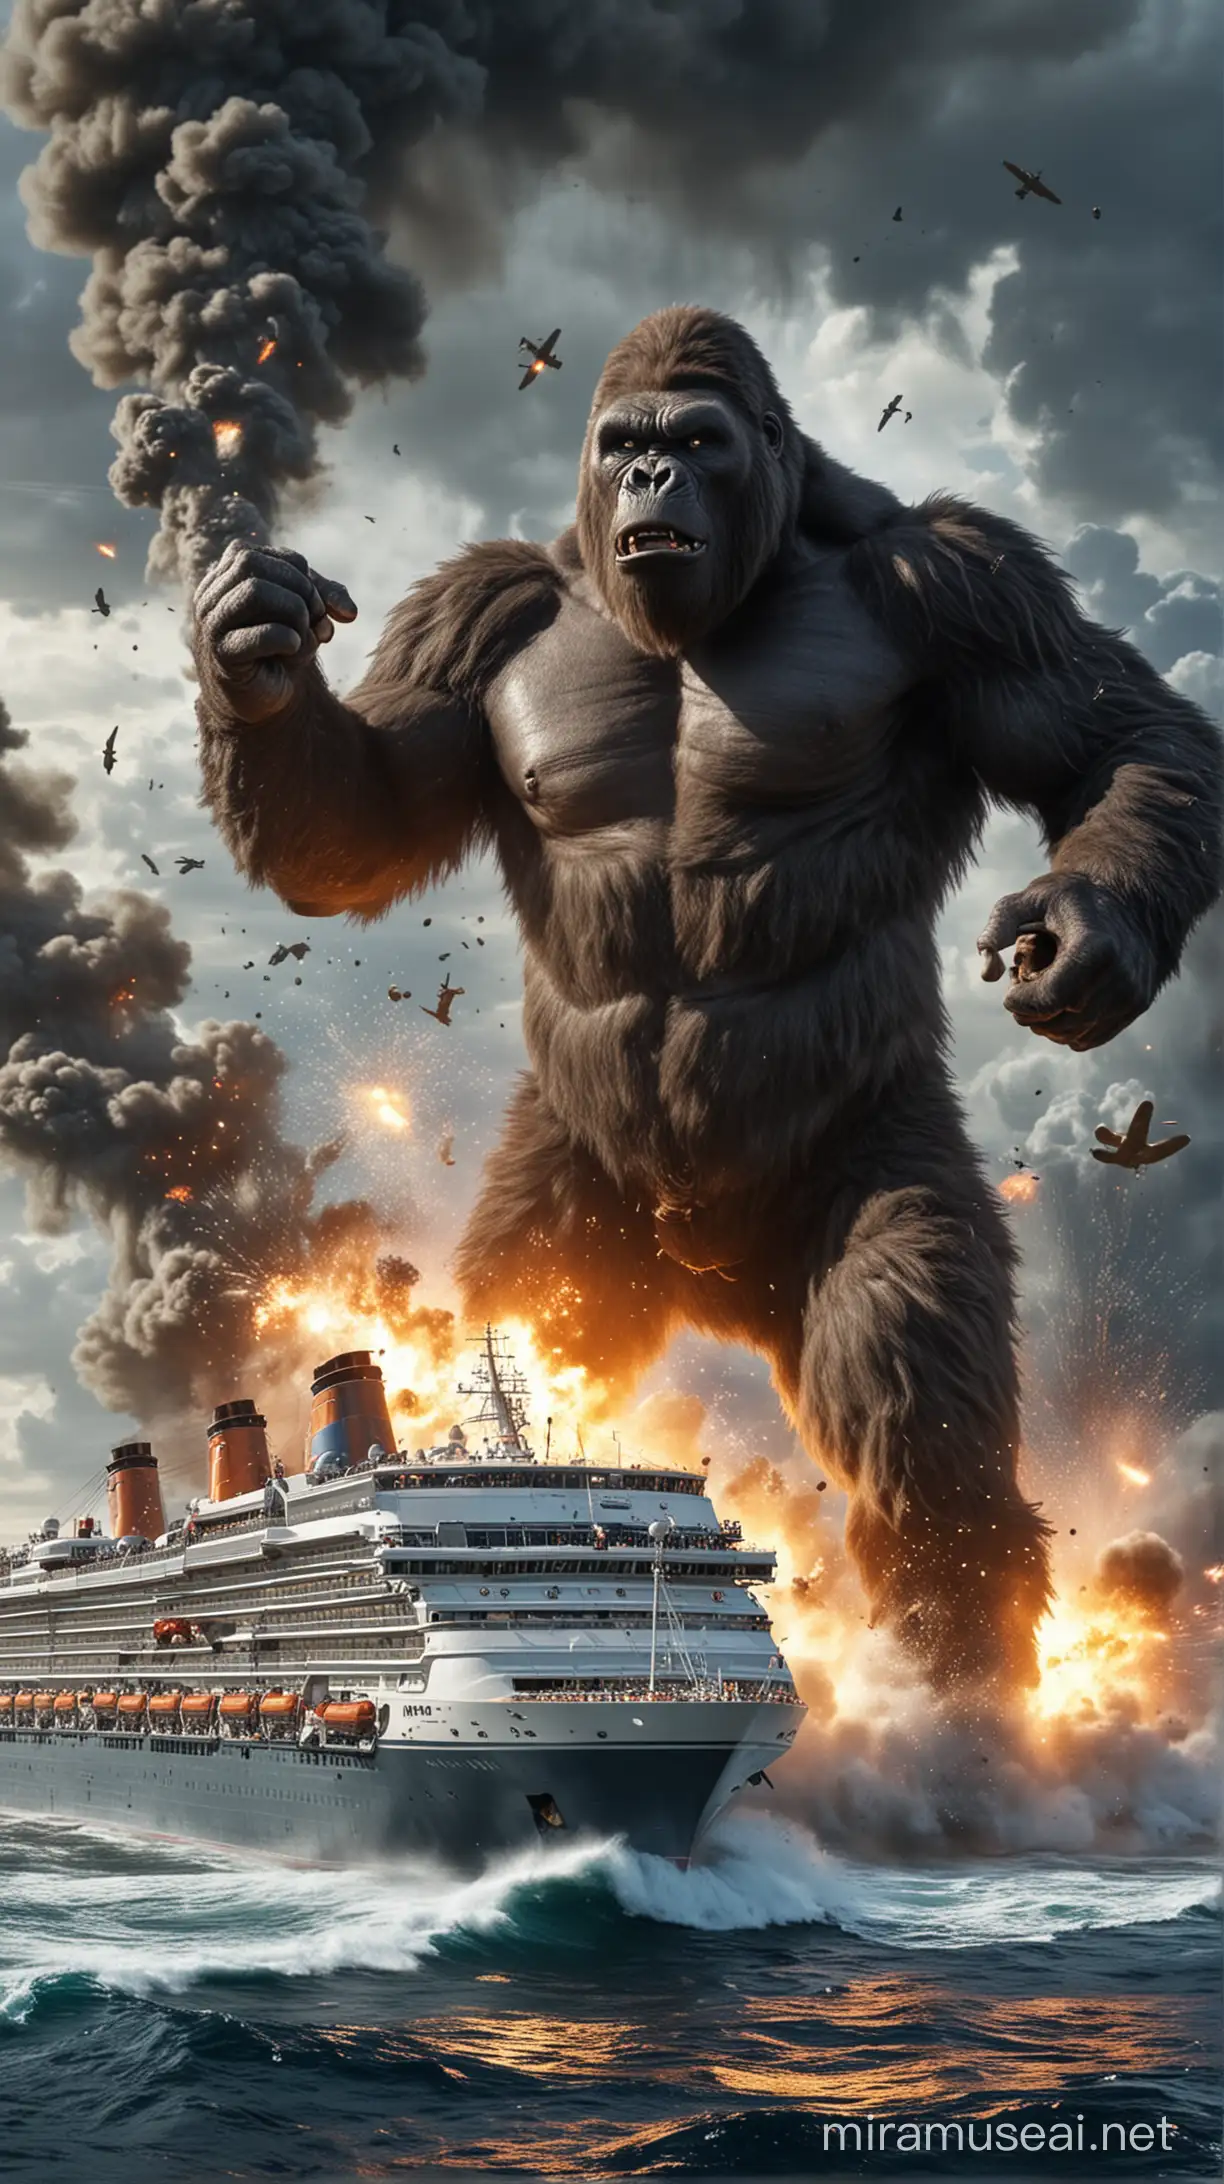 Kingkong attacked the cruise ship in sea,explosion